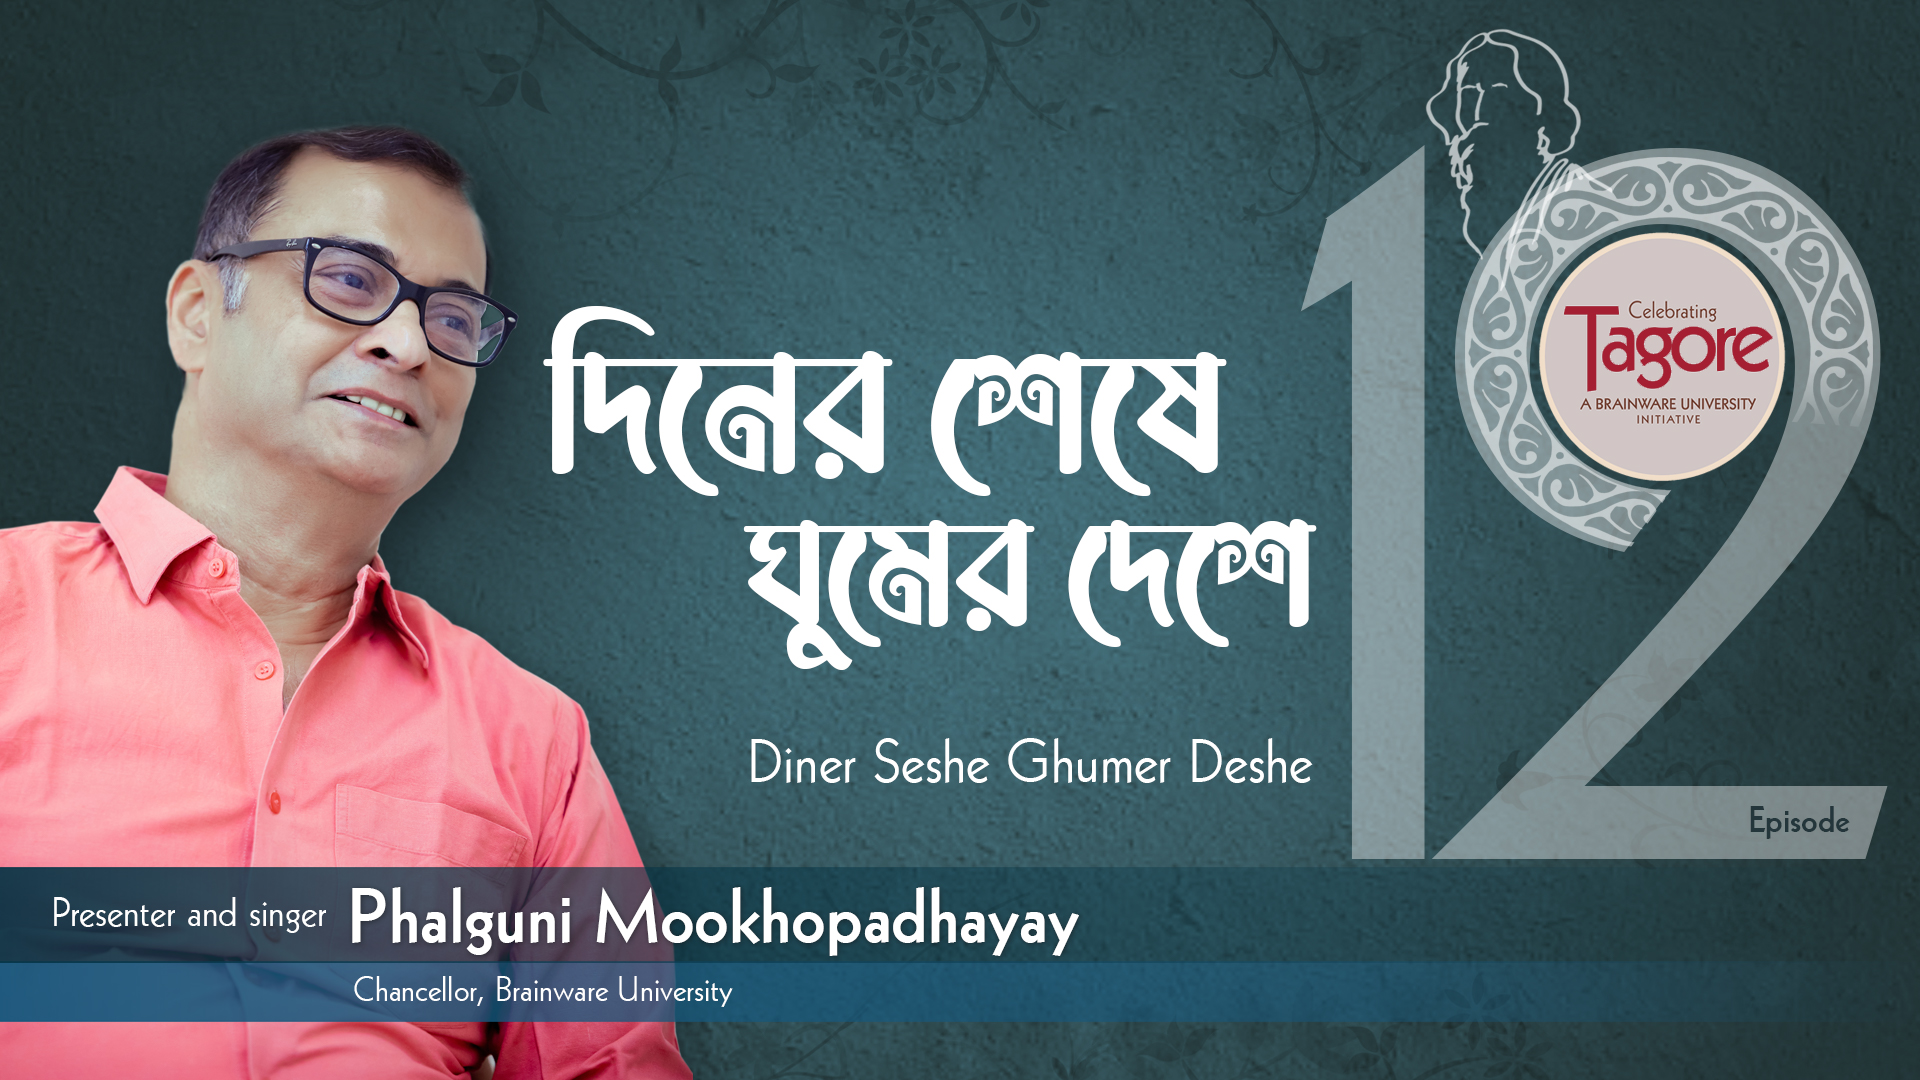 Celebrating Tagore - A Brainware University initiative. The poster for Episode 12 titled "Diner Seshe Ghumer Deshe" features Phalguni Mookhopadhayay, the presenter and singer, who is also the Chancellor of Brainware University. This event highlights Rabindra Sangeet, the songs composed by Rabindranath Tagore.